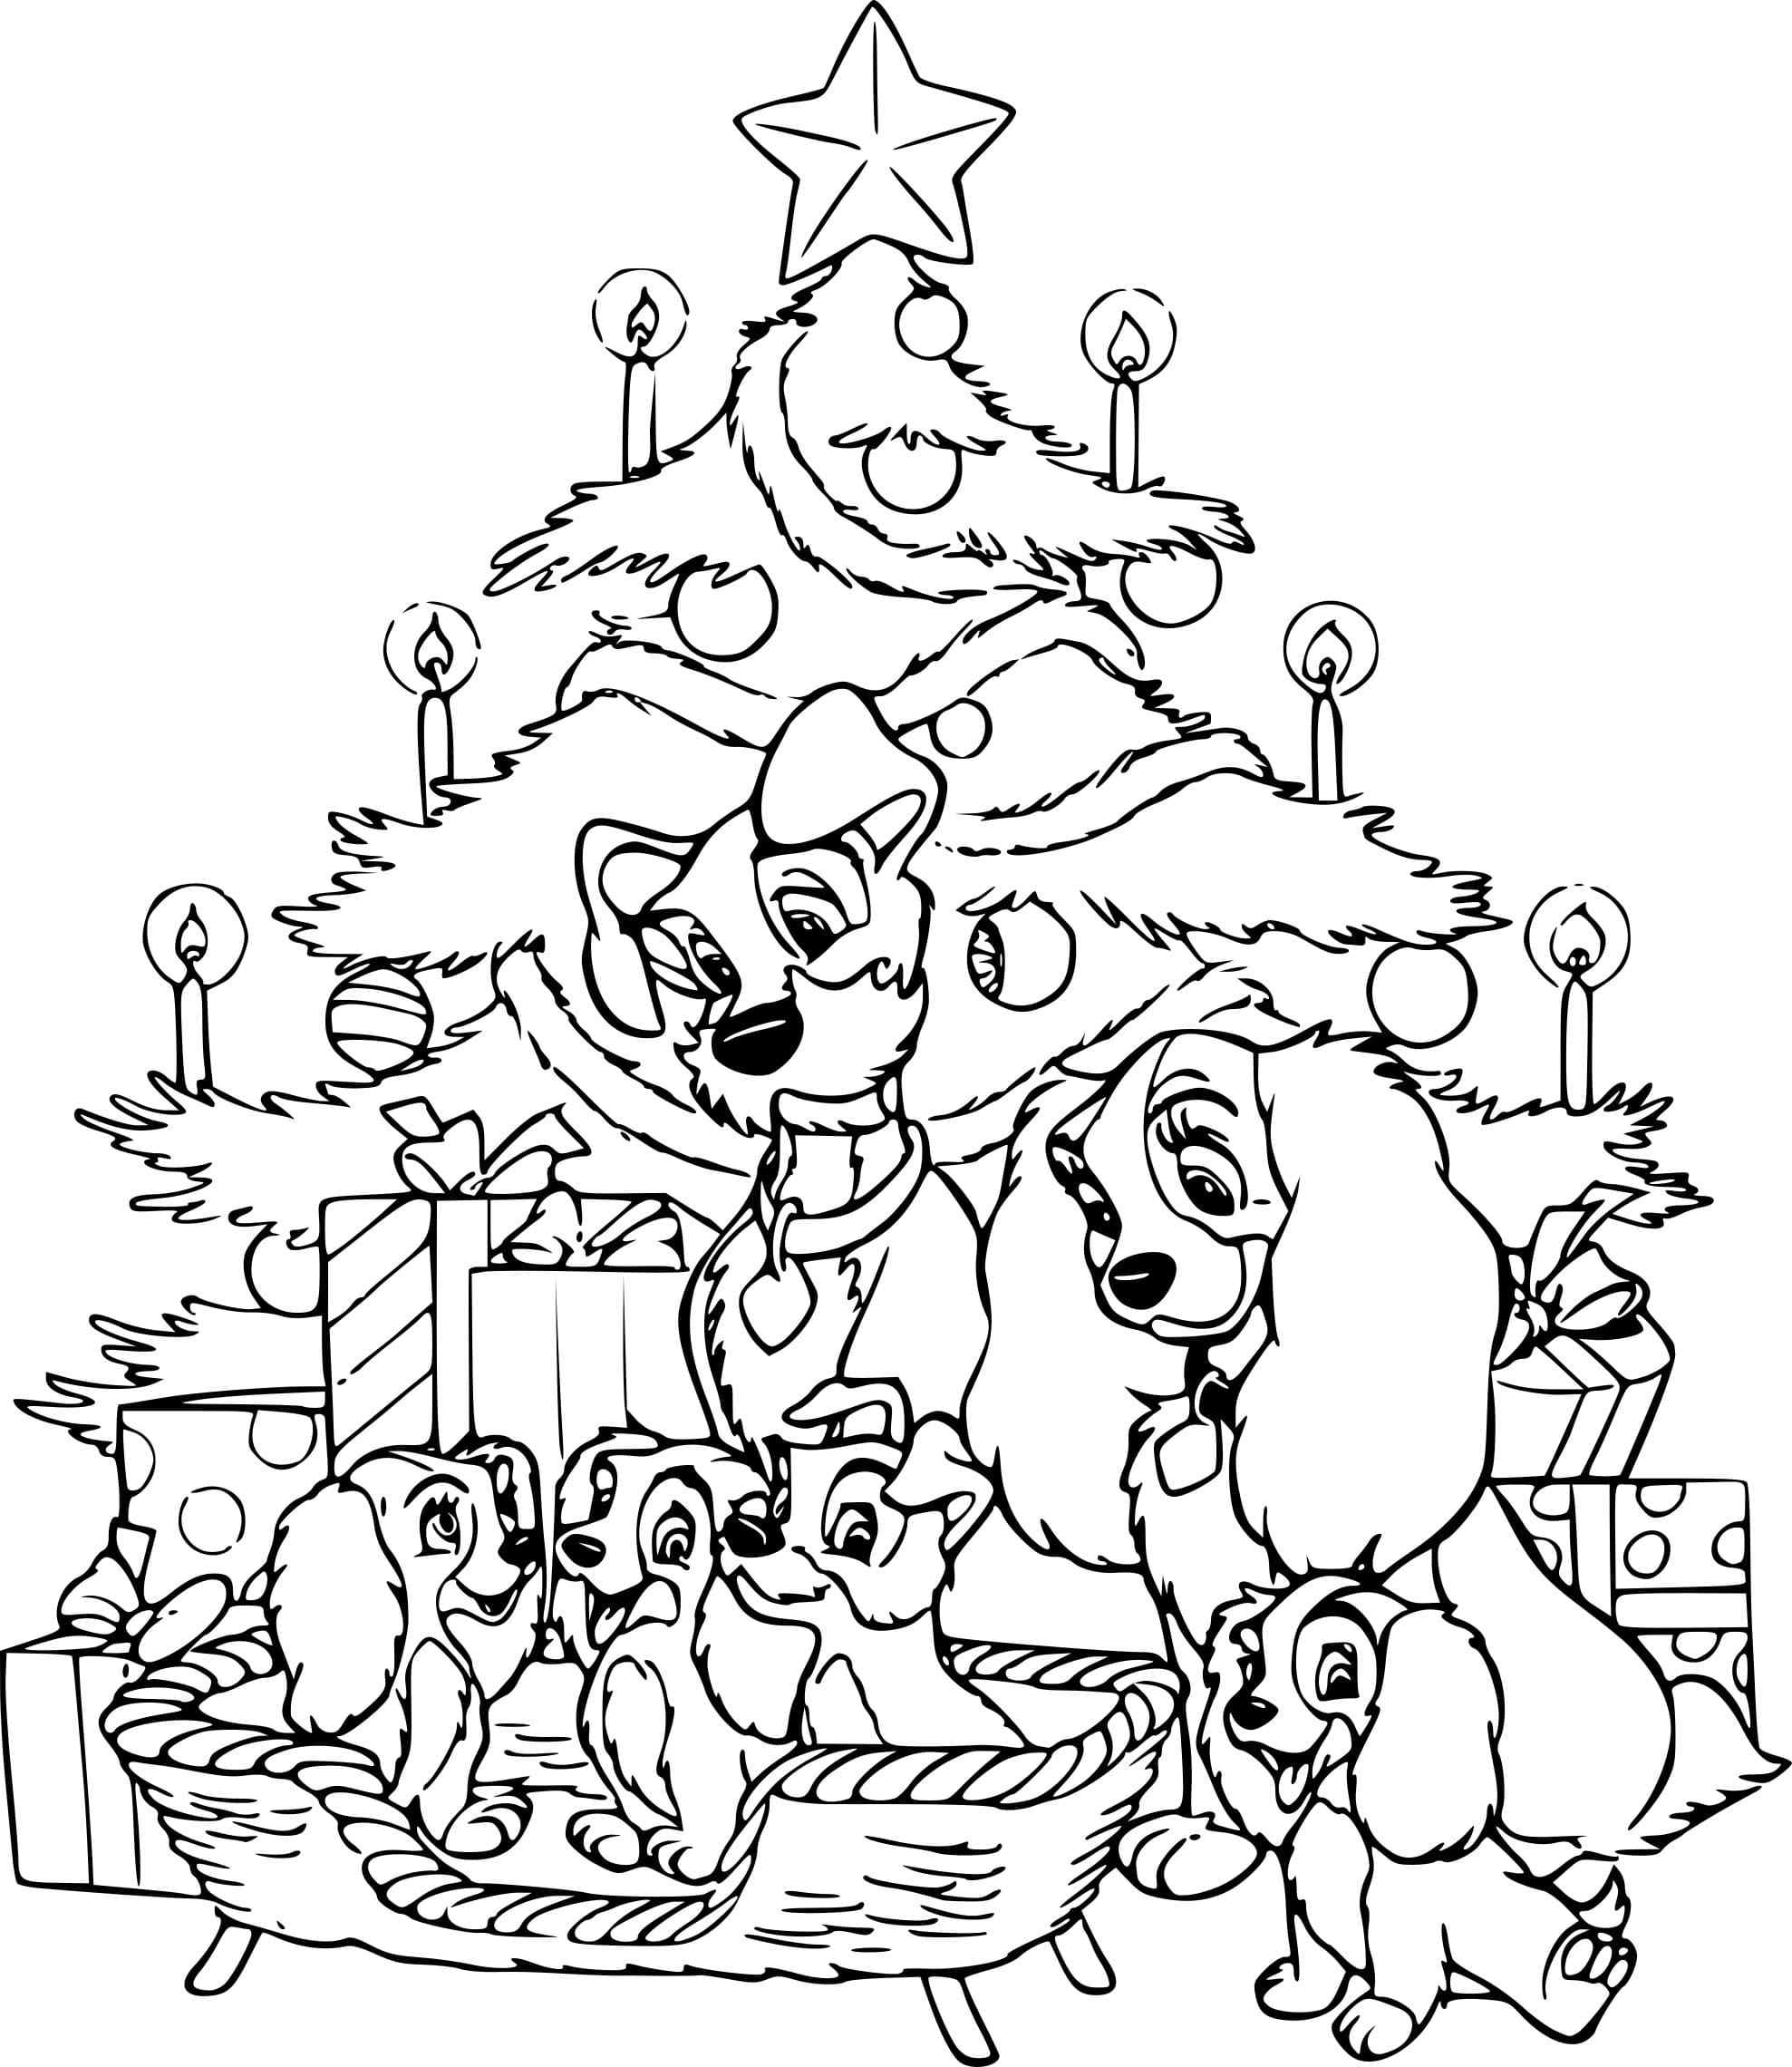 Family Party At Home Coloring Page